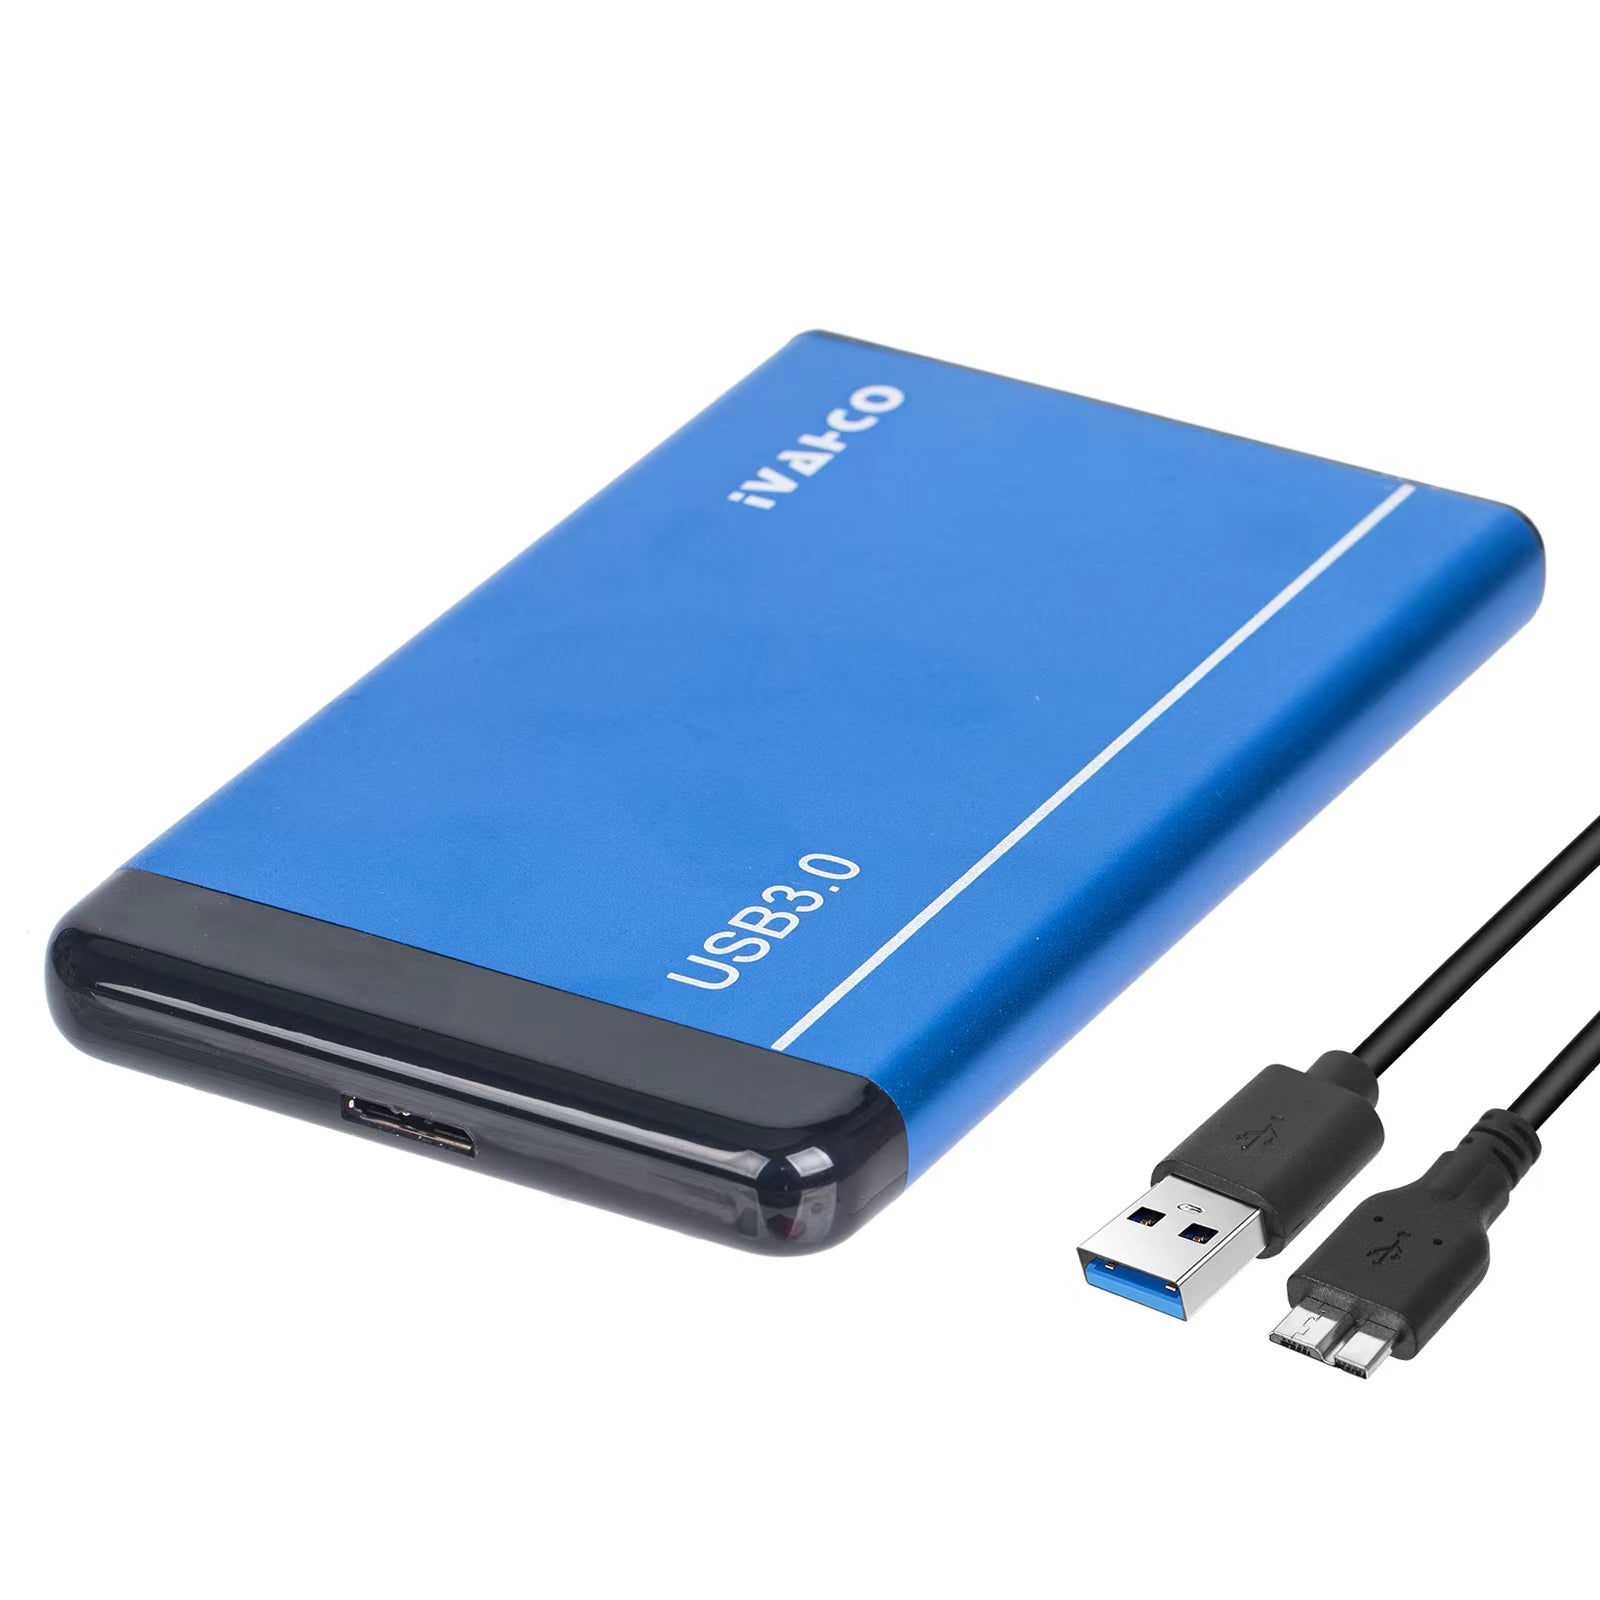 IVAHCO 750GB Matte Hard Drive Box 2.5" HDD External Case USB3.0 Hard Disk Enclosure with Data Cable - Blue